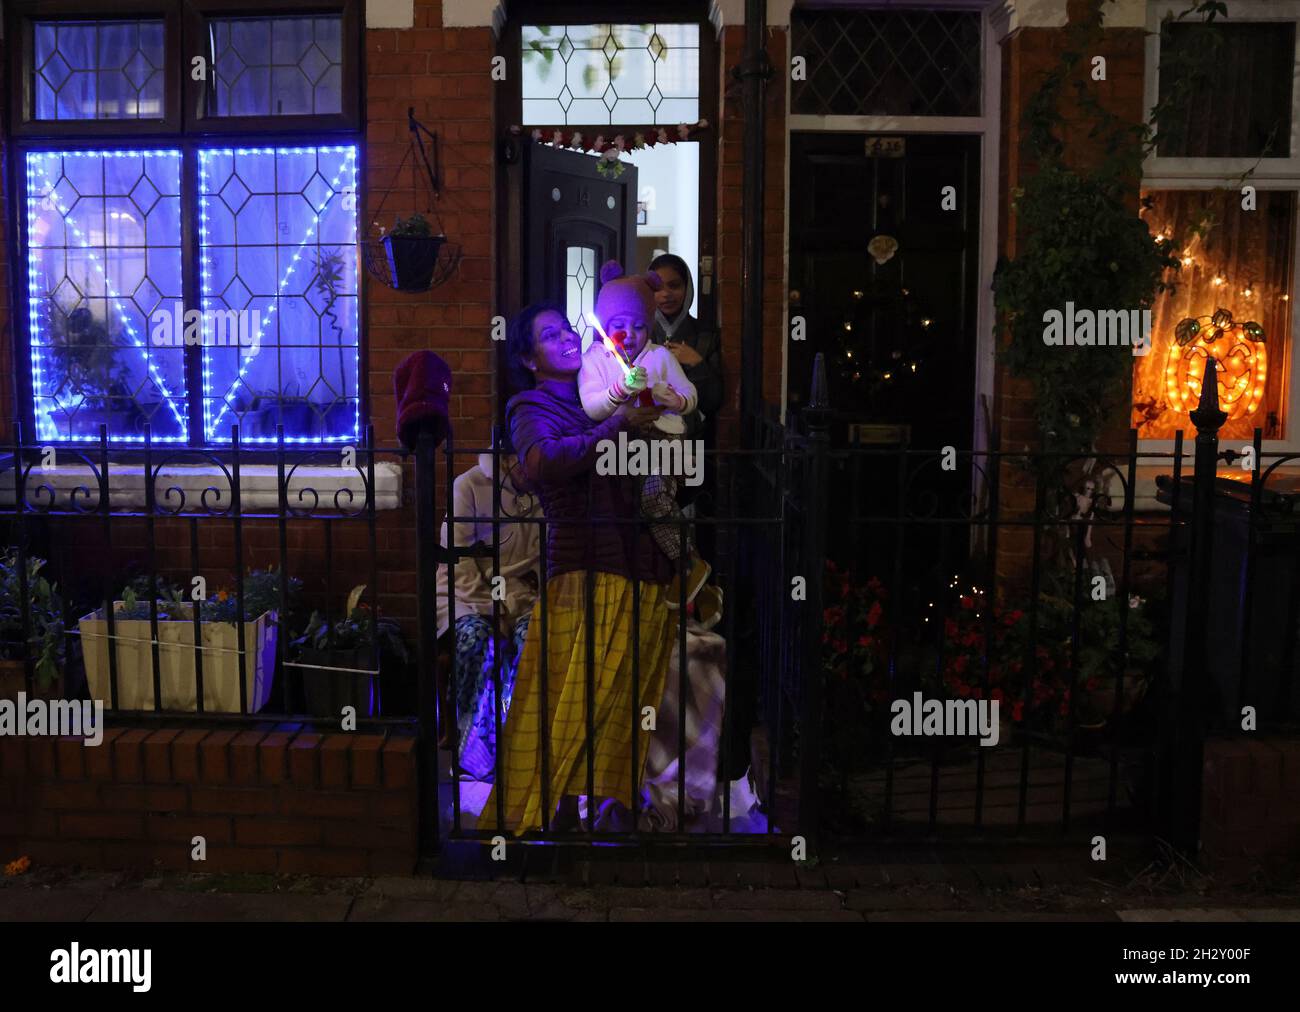 Leicester, Leicestershire, UK. 24th October 2021. A family stand in their garden after the Diwali lights switch on event which was different from normal with no main stage or firework display because of Covid-19 worries. Credit Darren Staples/Alamy Live News. Stock Photo